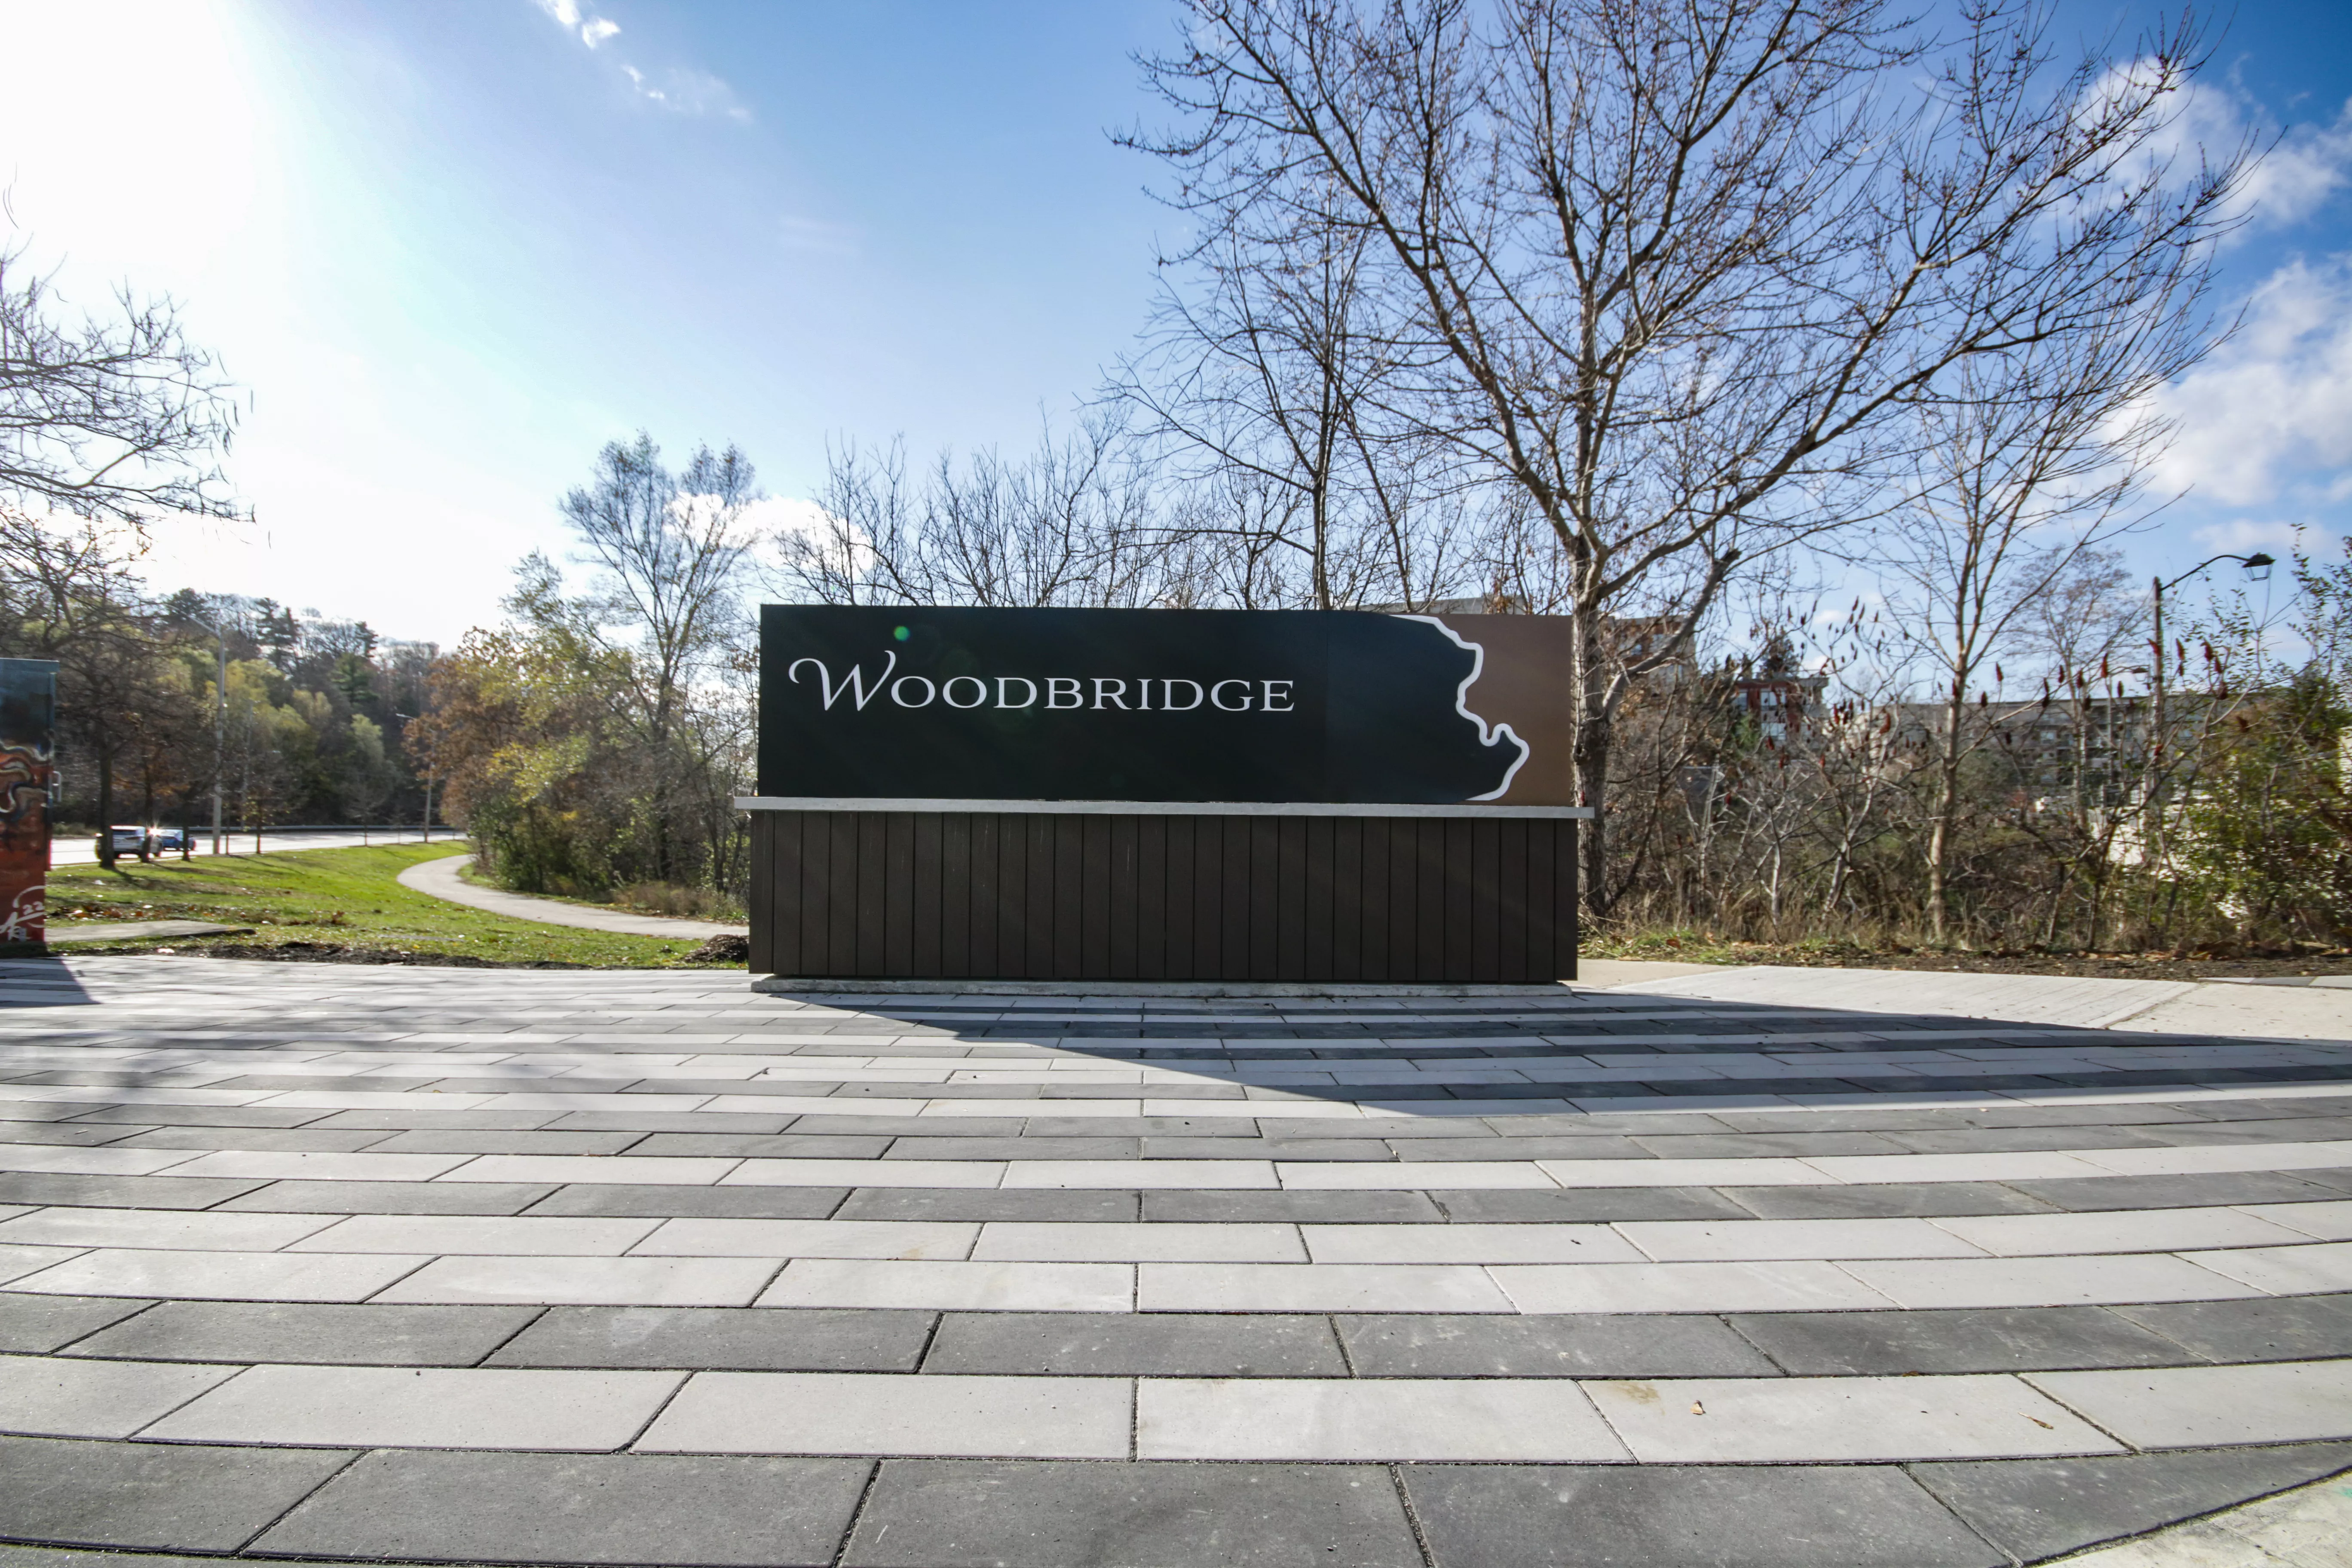 This image is of the new Woodbridge sign, located on Woodbridge Avenue. The sign says Woodbridge on it. 